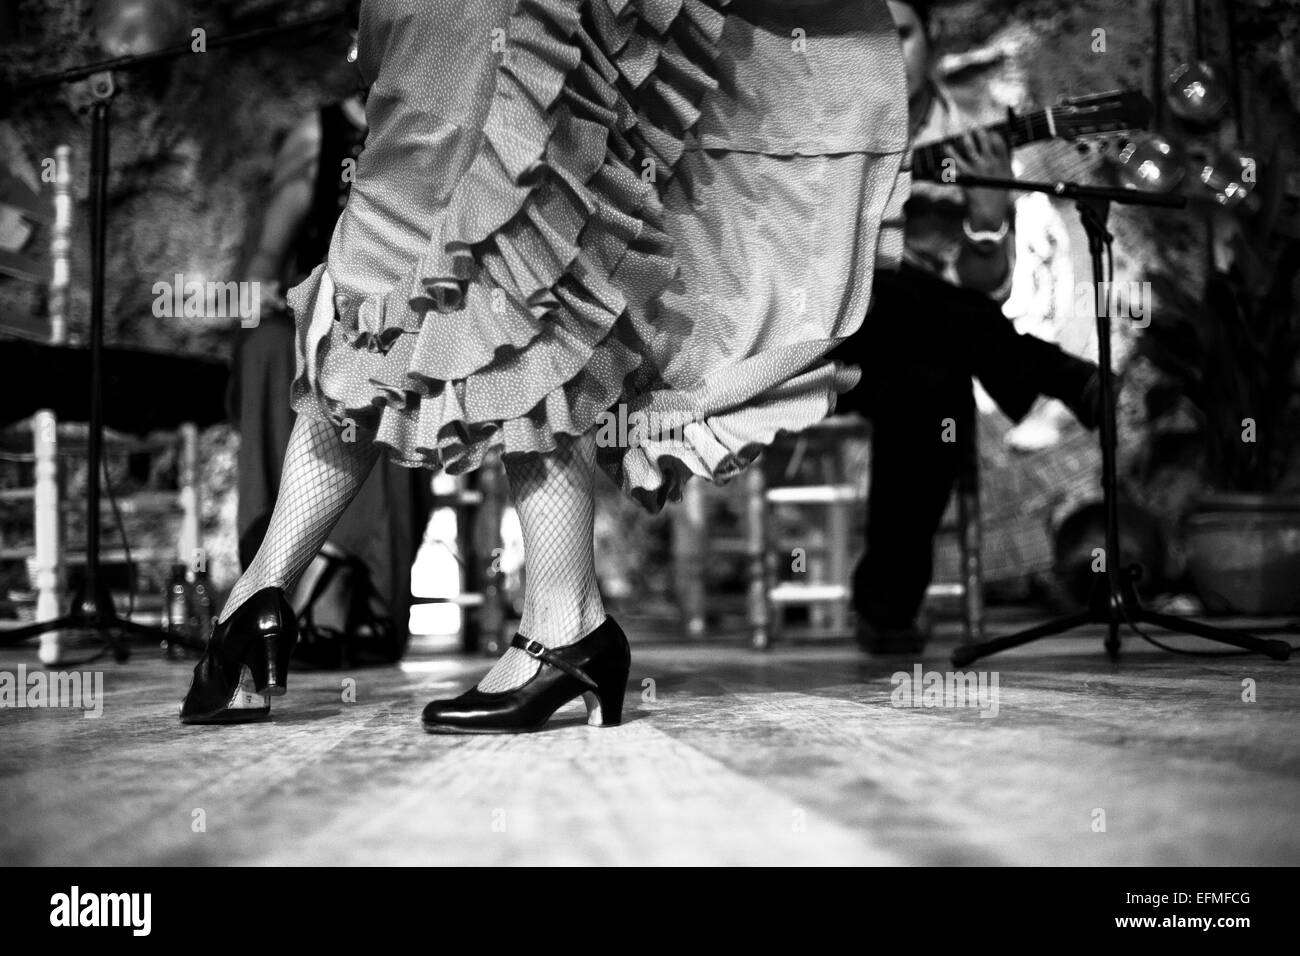 Flamenco dancing in a cave in spain. Stock Photo